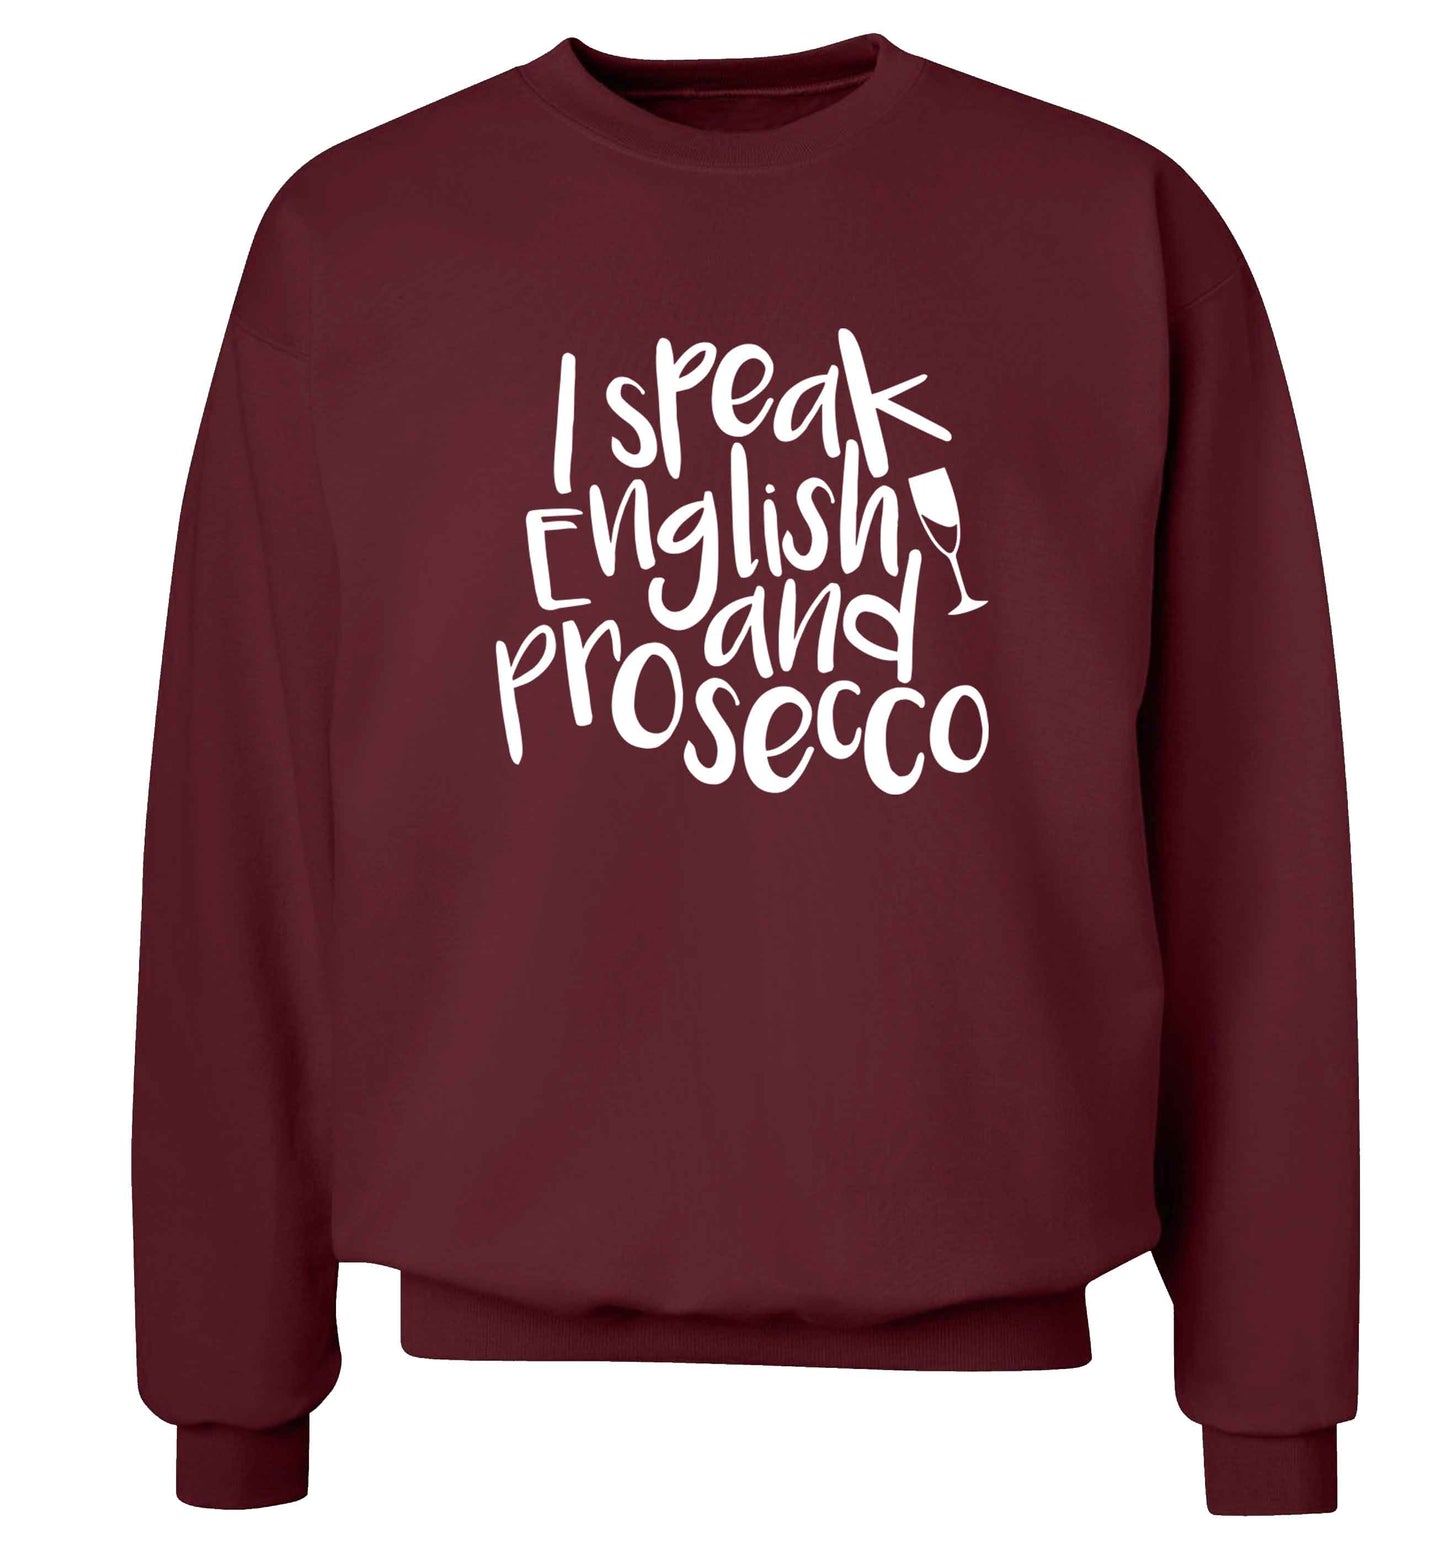 I speak English and prosecco Adult's unisex maroon Sweater 2XL